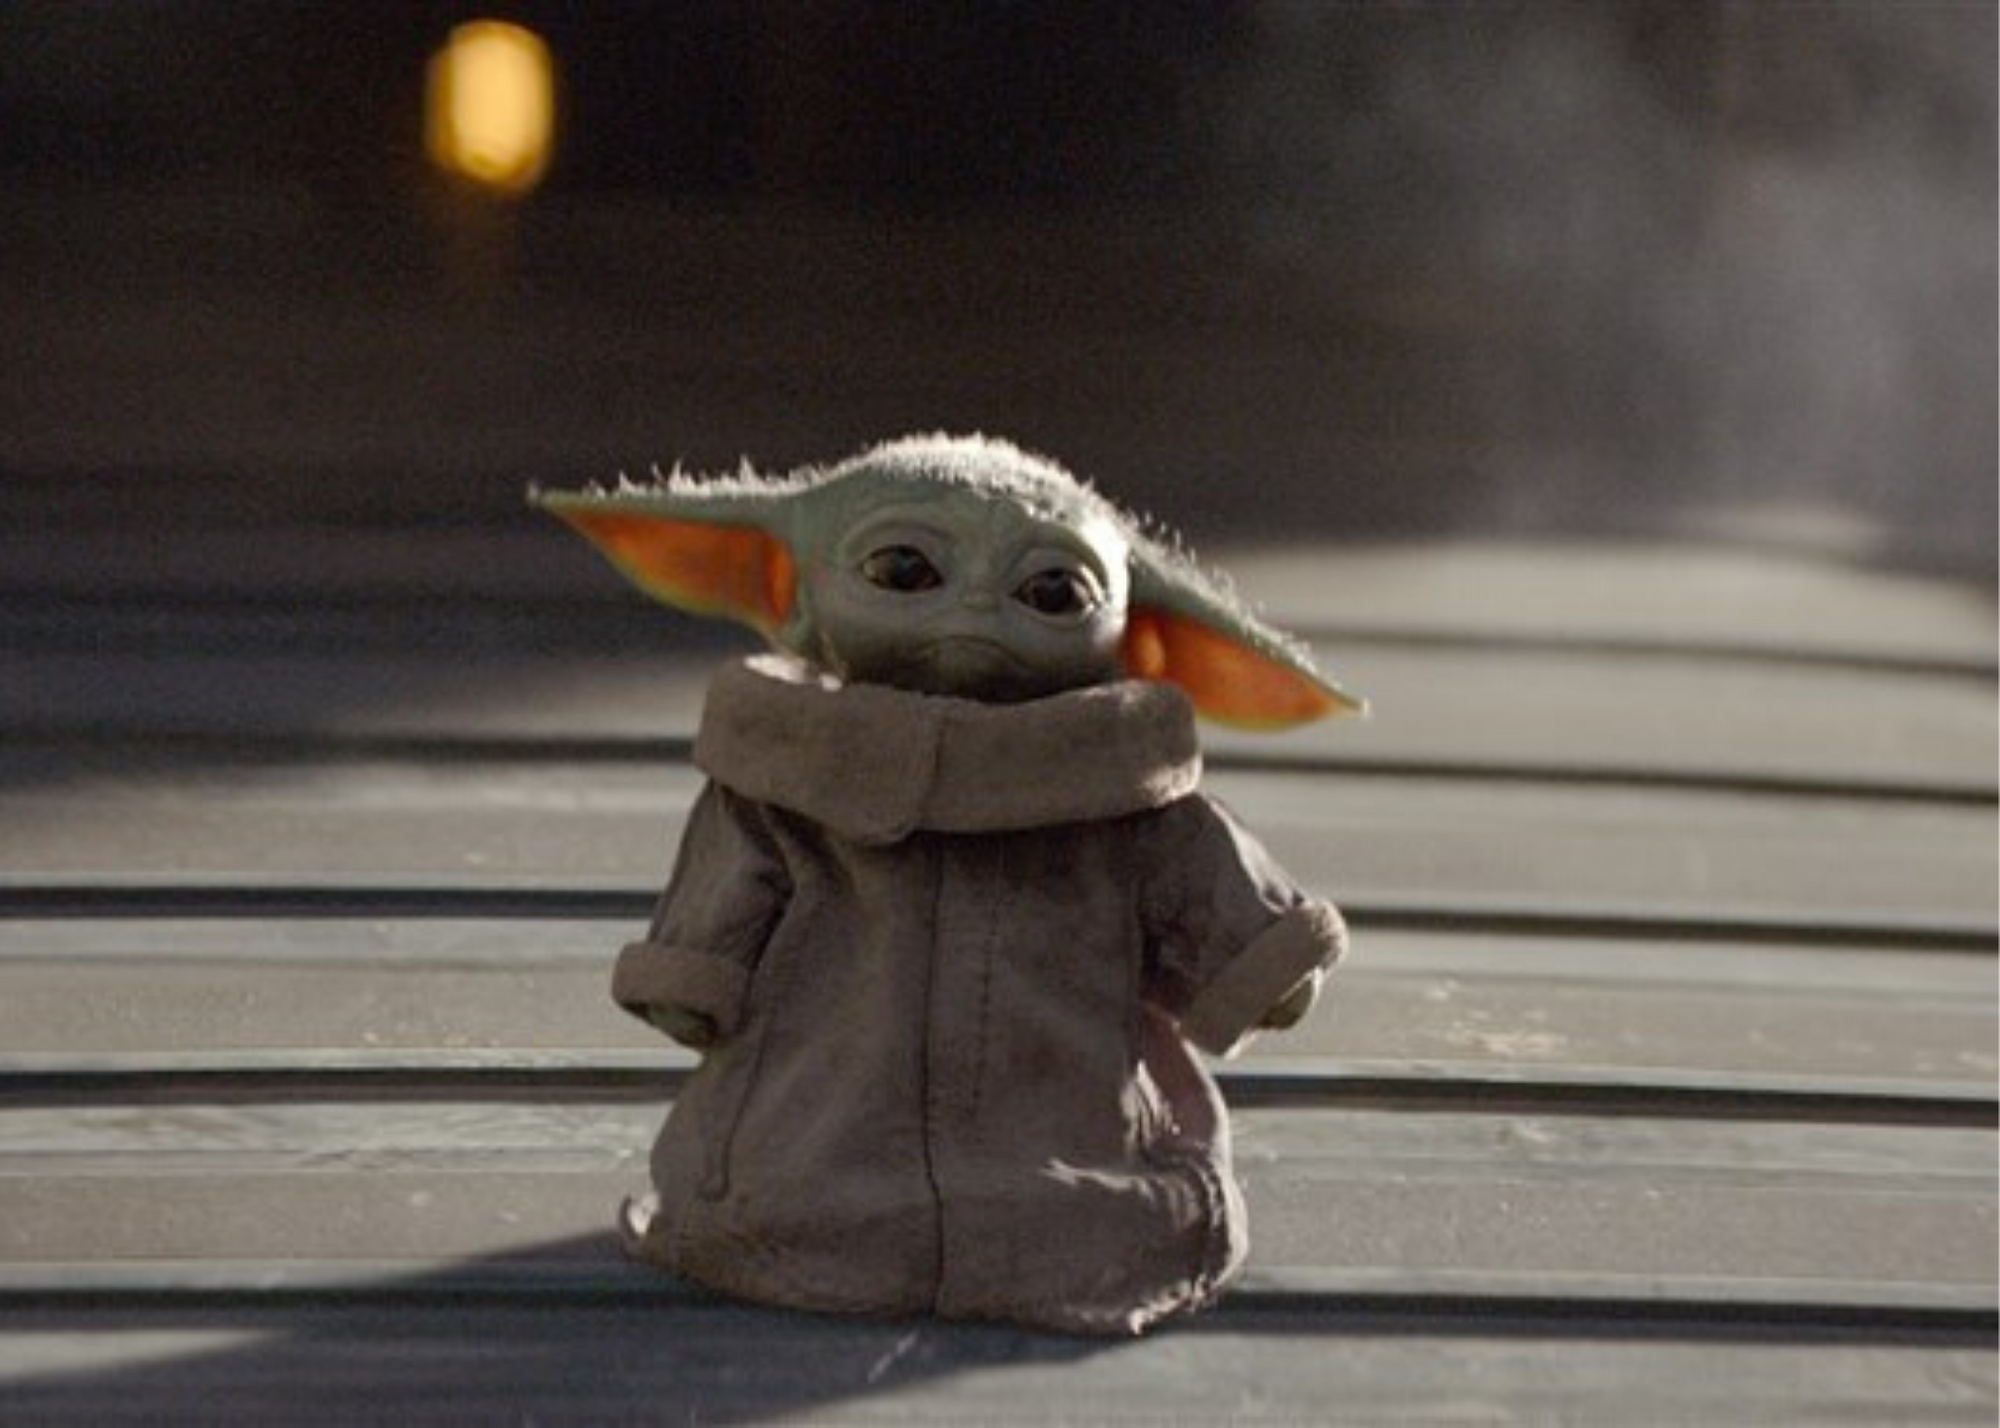 6 Stages of the Pre-leasing Process As Told by Baby Yoda